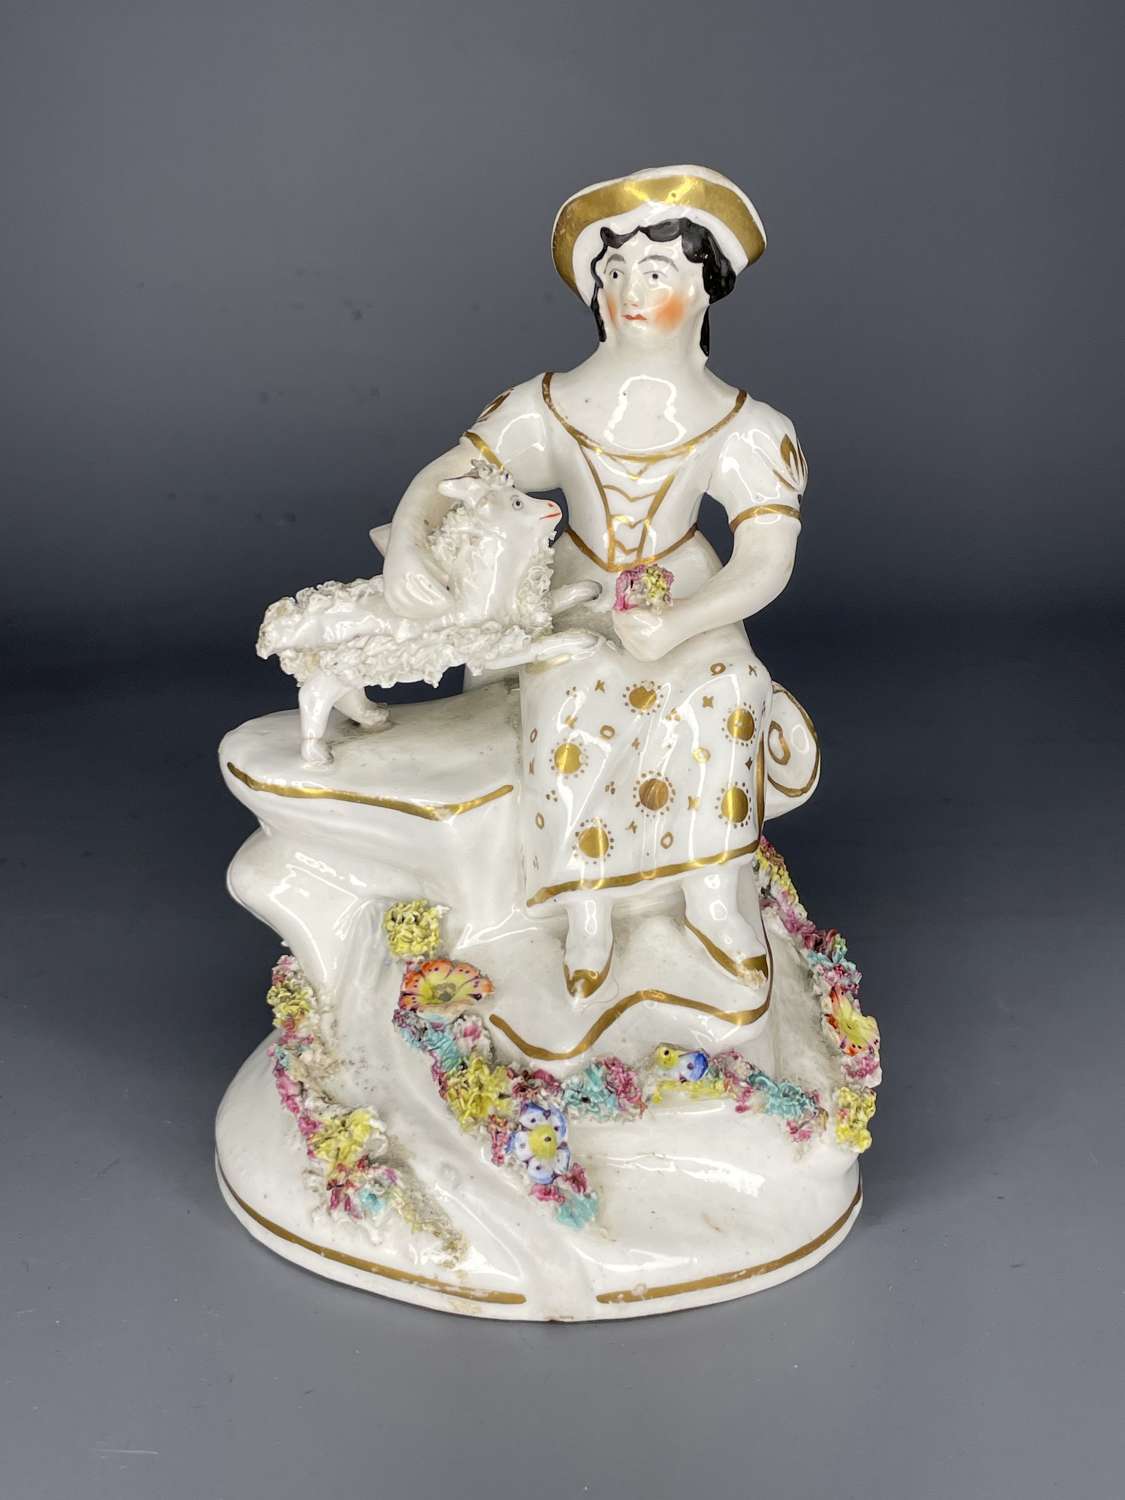 Early Victorian Staffordshire Porcelain Figure of a Girl with a Goat